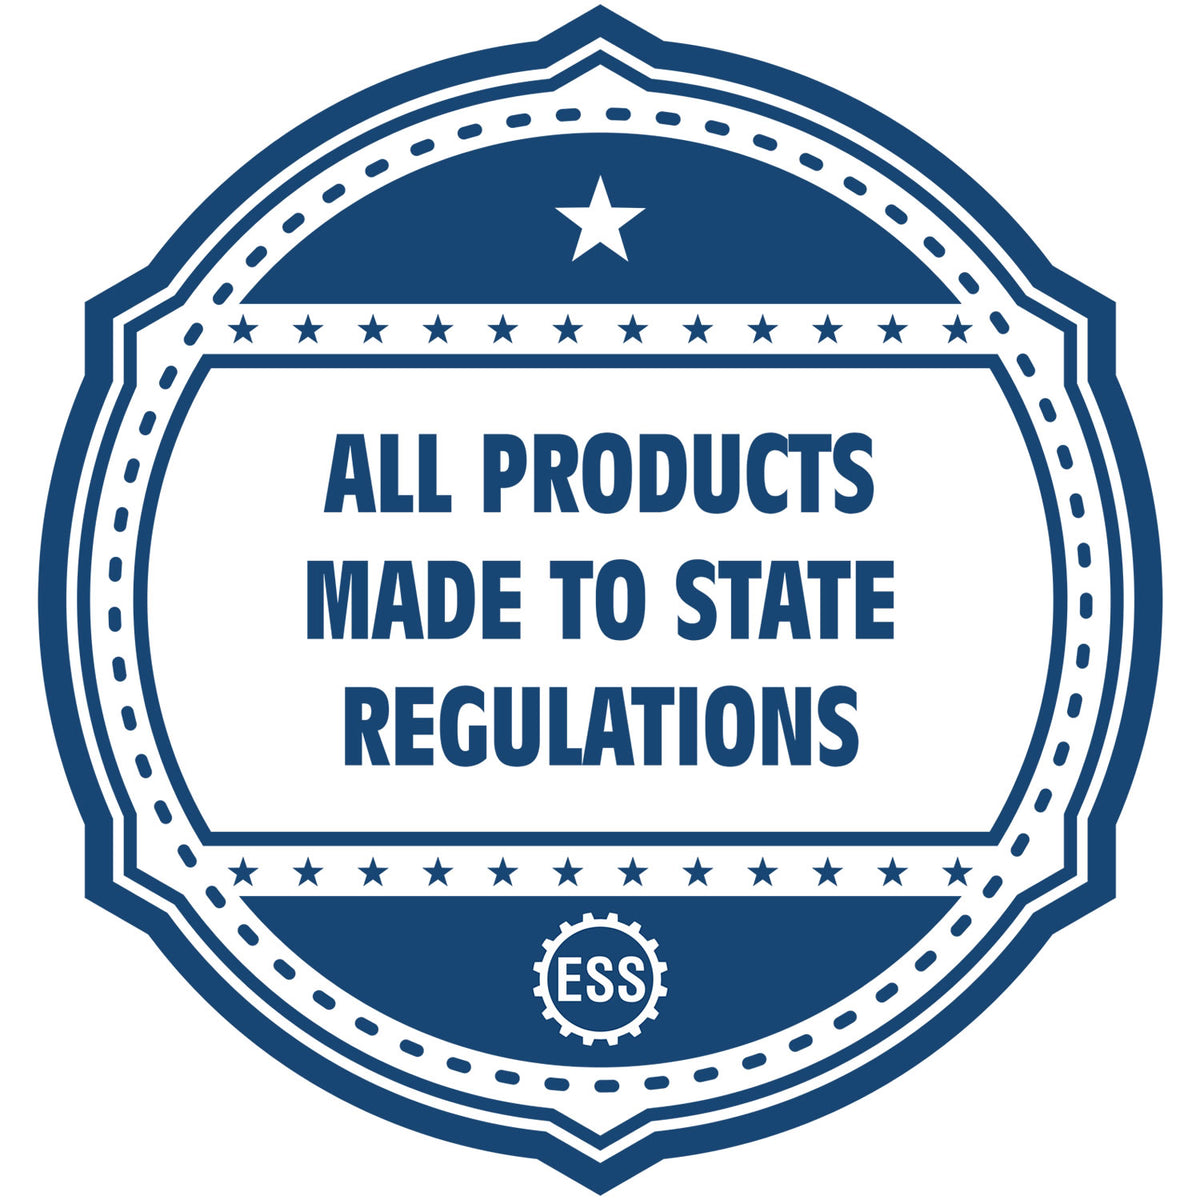 An icon or badge element for the Premium MaxLight Pre-Inked New Jersey Engineering Stamp showing that this product is made in compliance with state regulations.